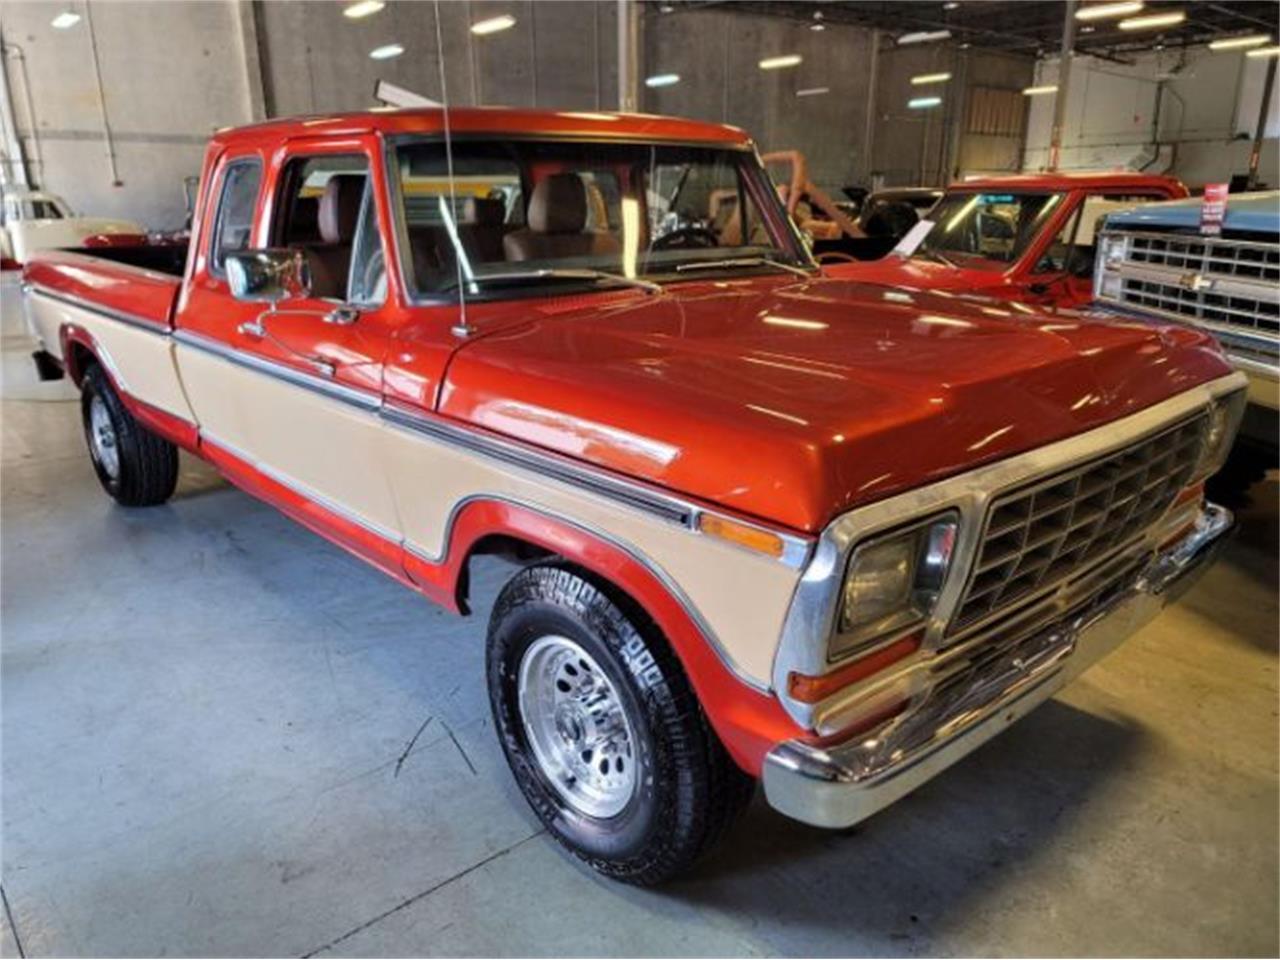 For Sale: 1972 Ford F250 in Cadillac, Michigan for sale in Cadillac, MI